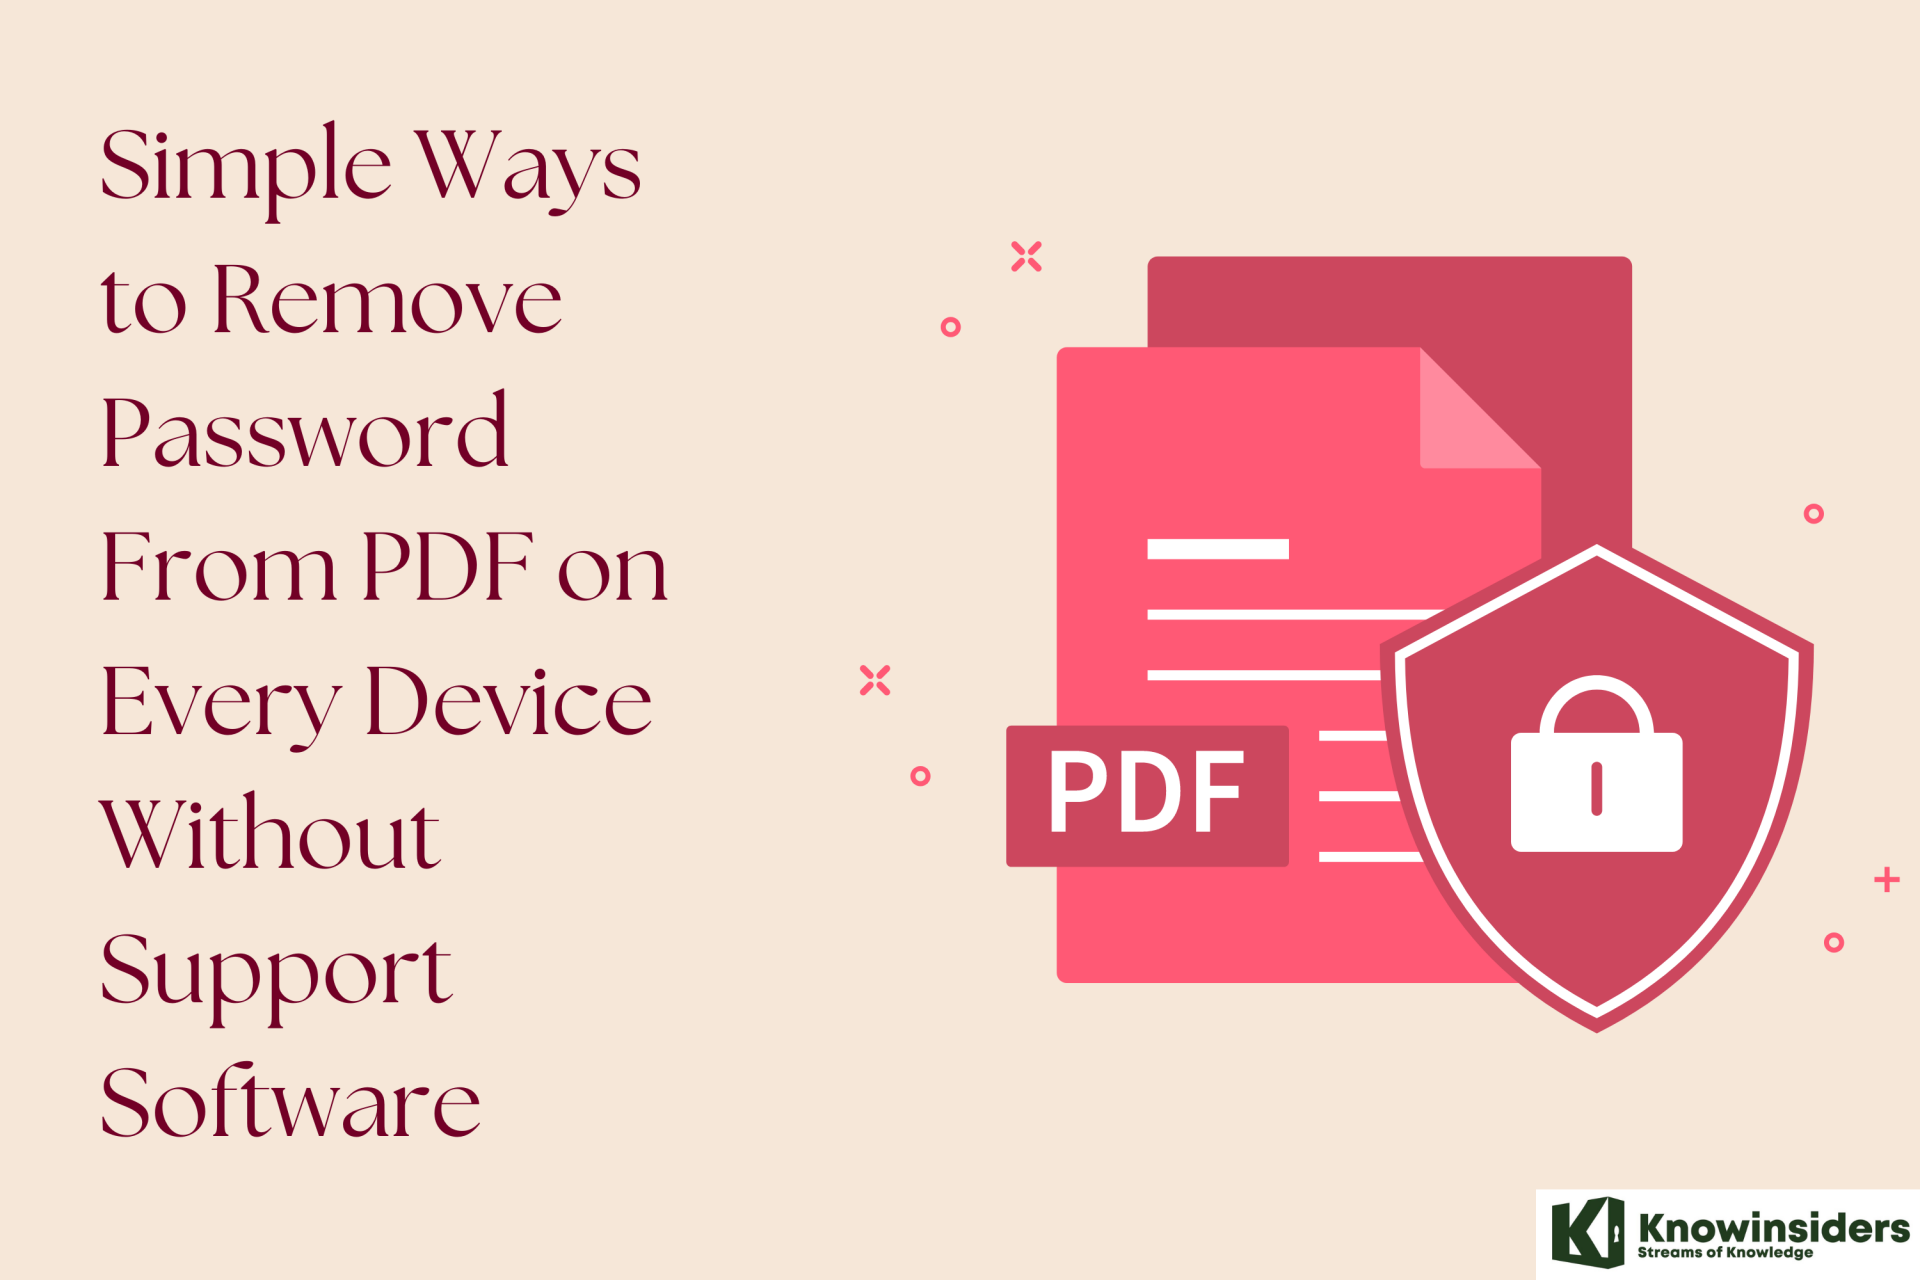 Simple Ways to Remove Password From PDF on Every Device Without Support Software